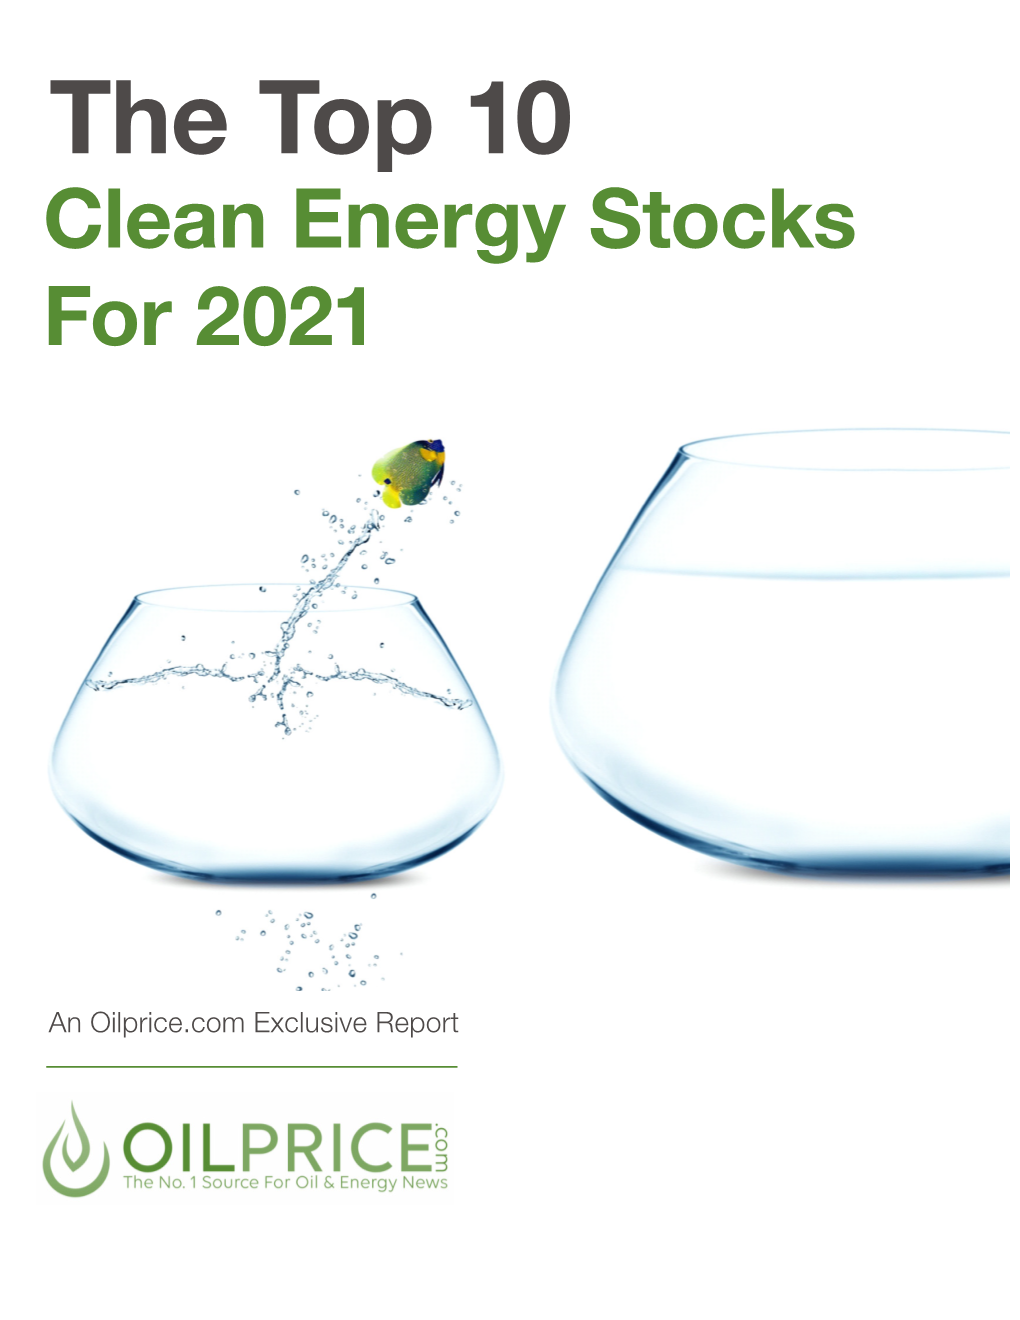 The Top 10 Clean Energy Stocks for 2021